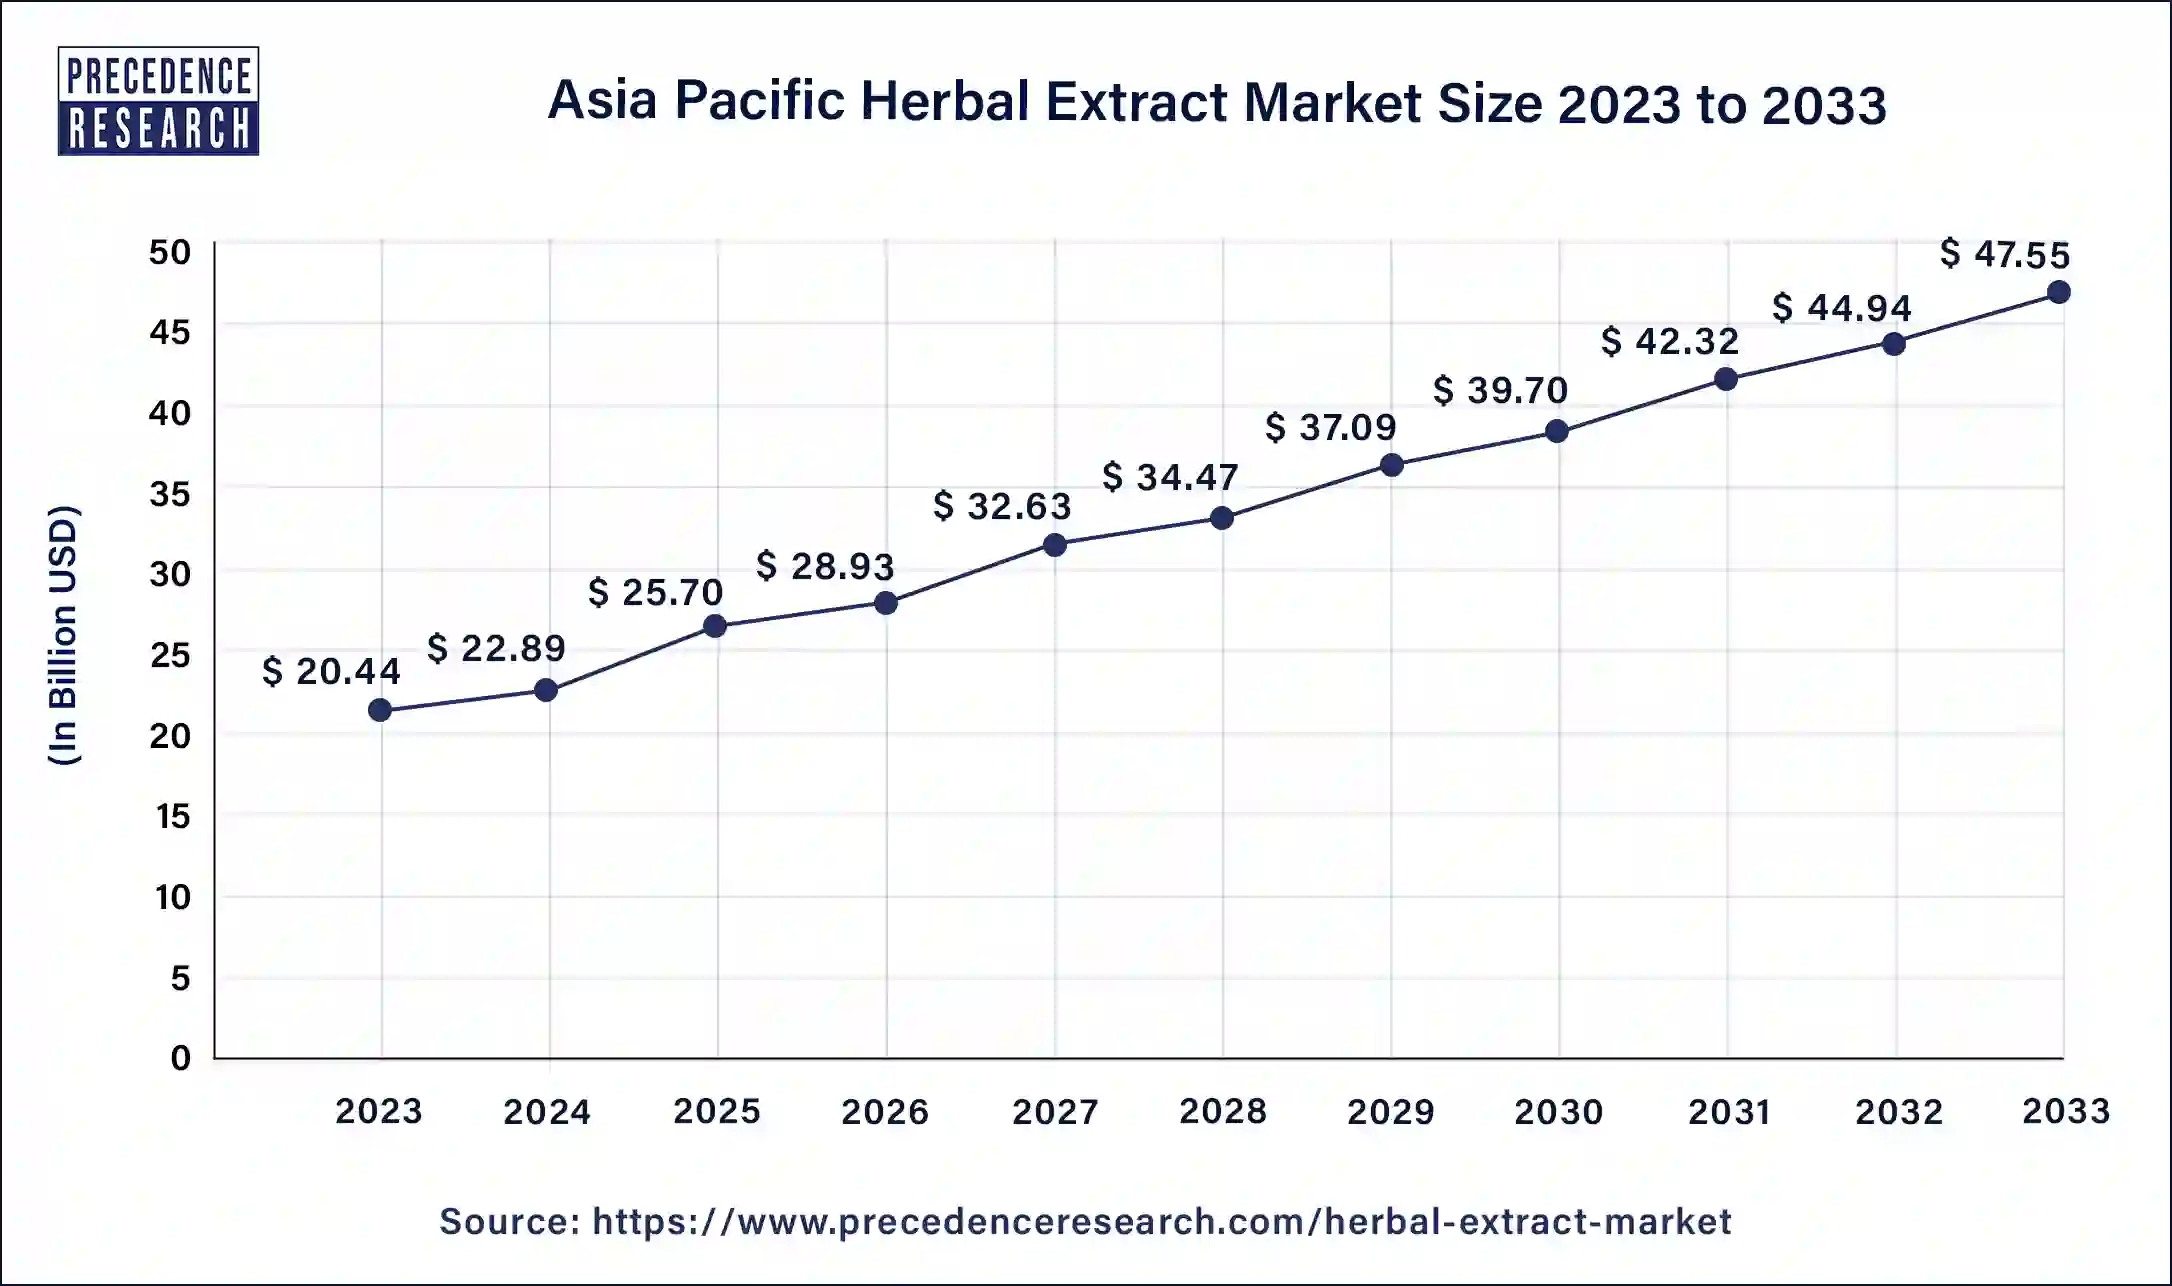 Asia Pacific Herbal Extract Market Size 2024 to 2033